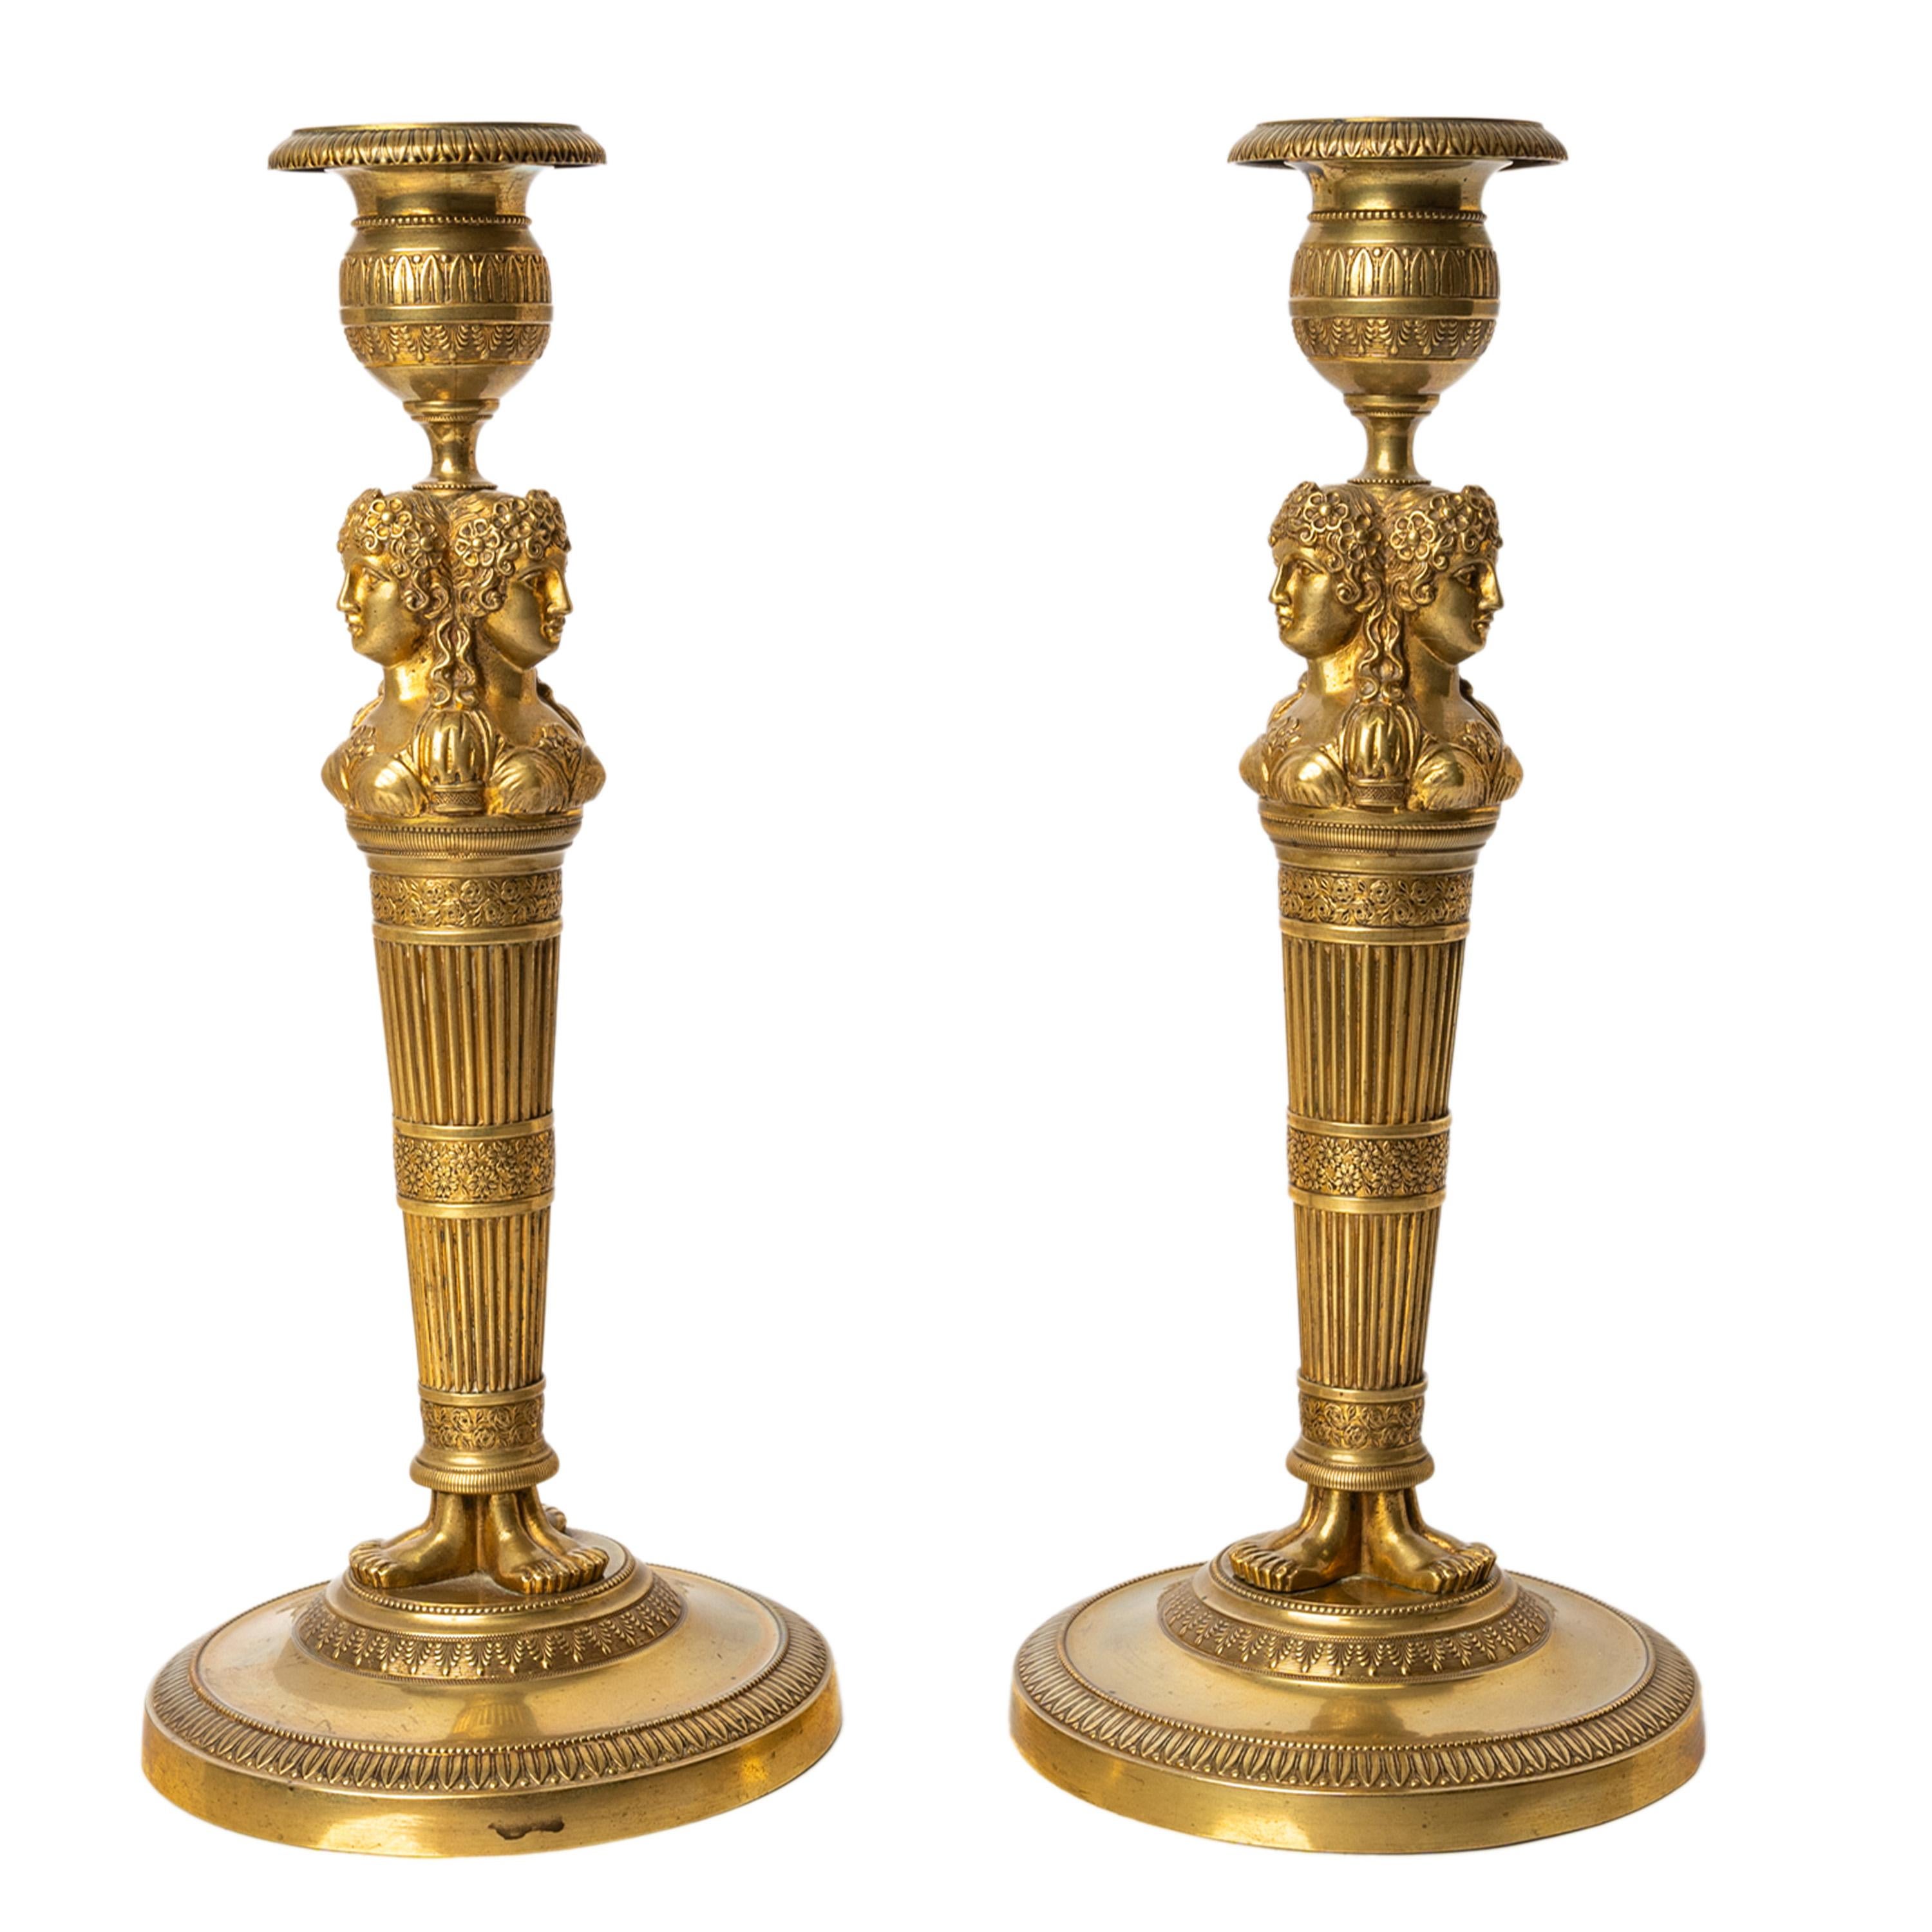 A very fine pair of antique early 19th century gilt bronze French Neoclassical Empire period candlesticks, circa 1820.
The candlesticks having removable sconces and globular capitals with leaf & garland decoration. At the top of each column there